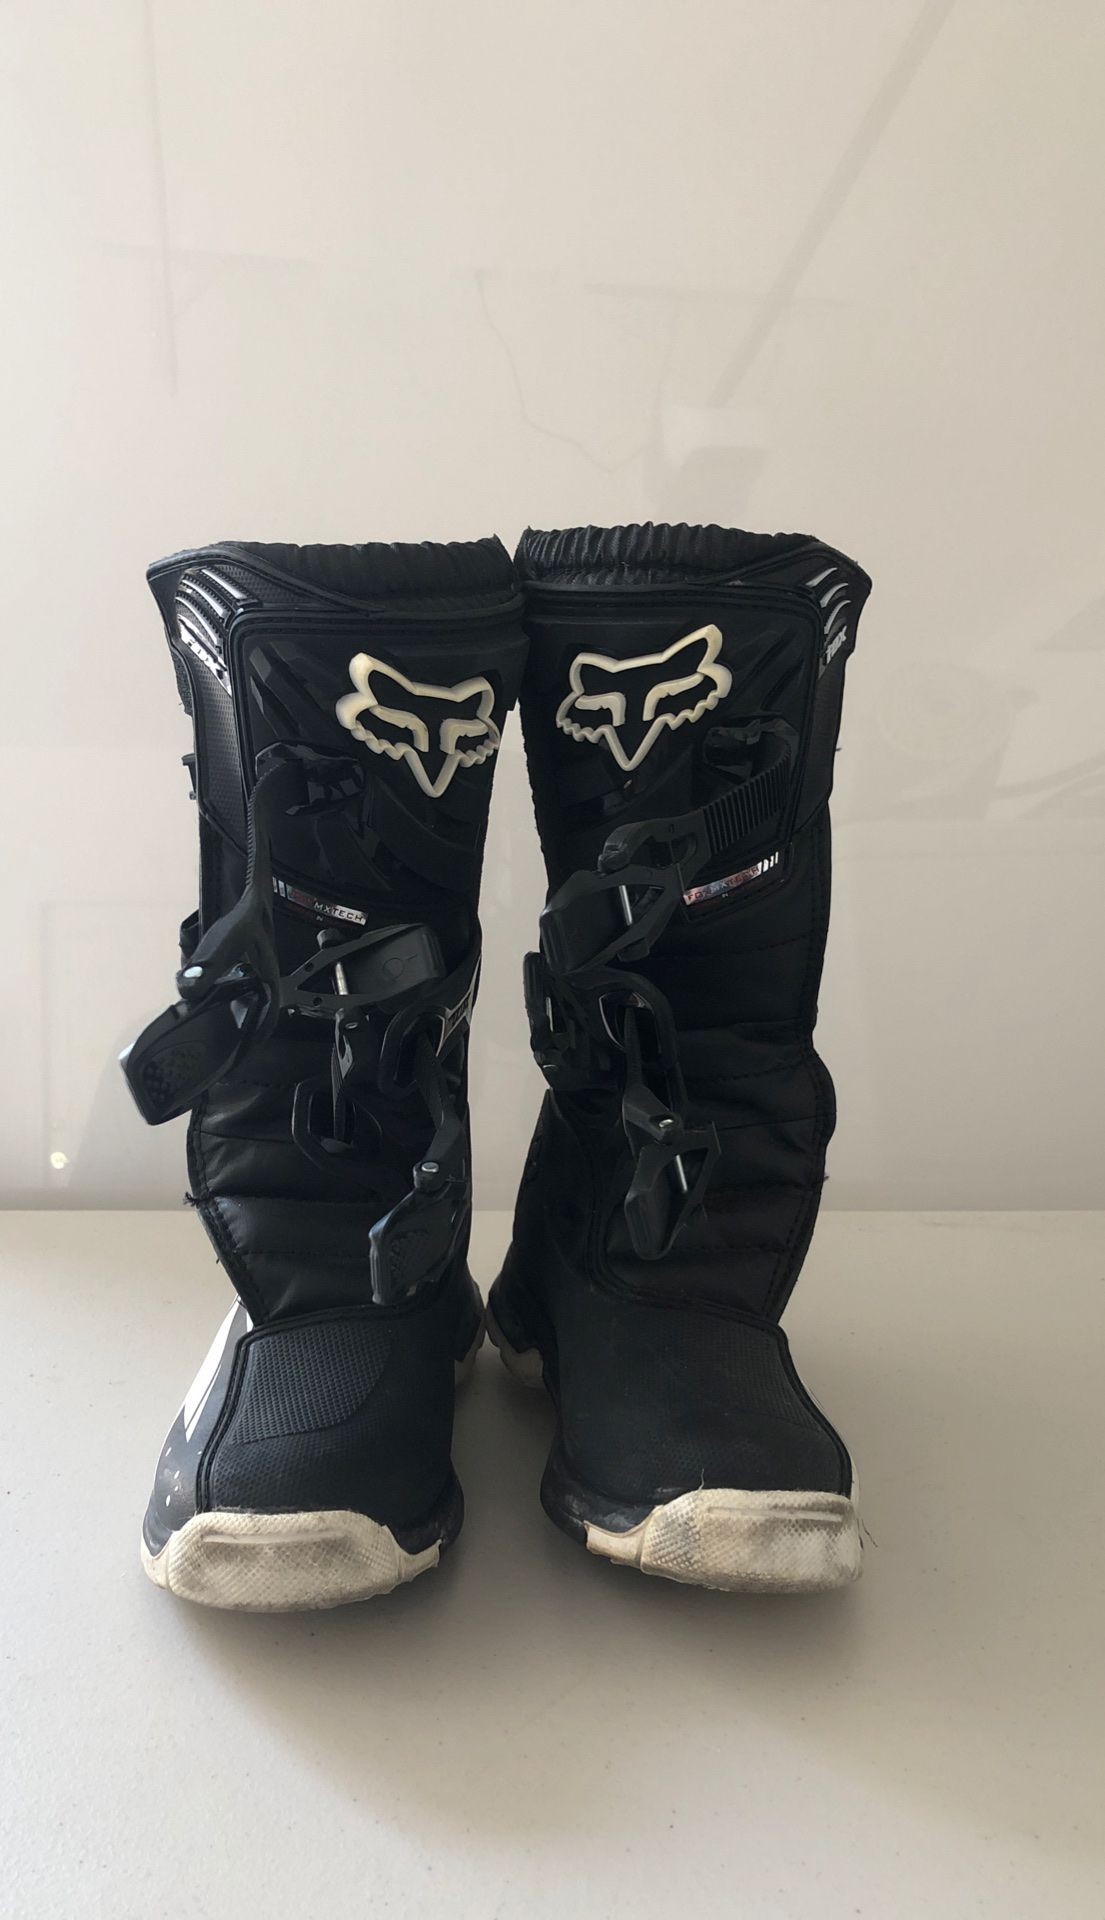 Fox Youth Comp 5 Motorcycle Boots